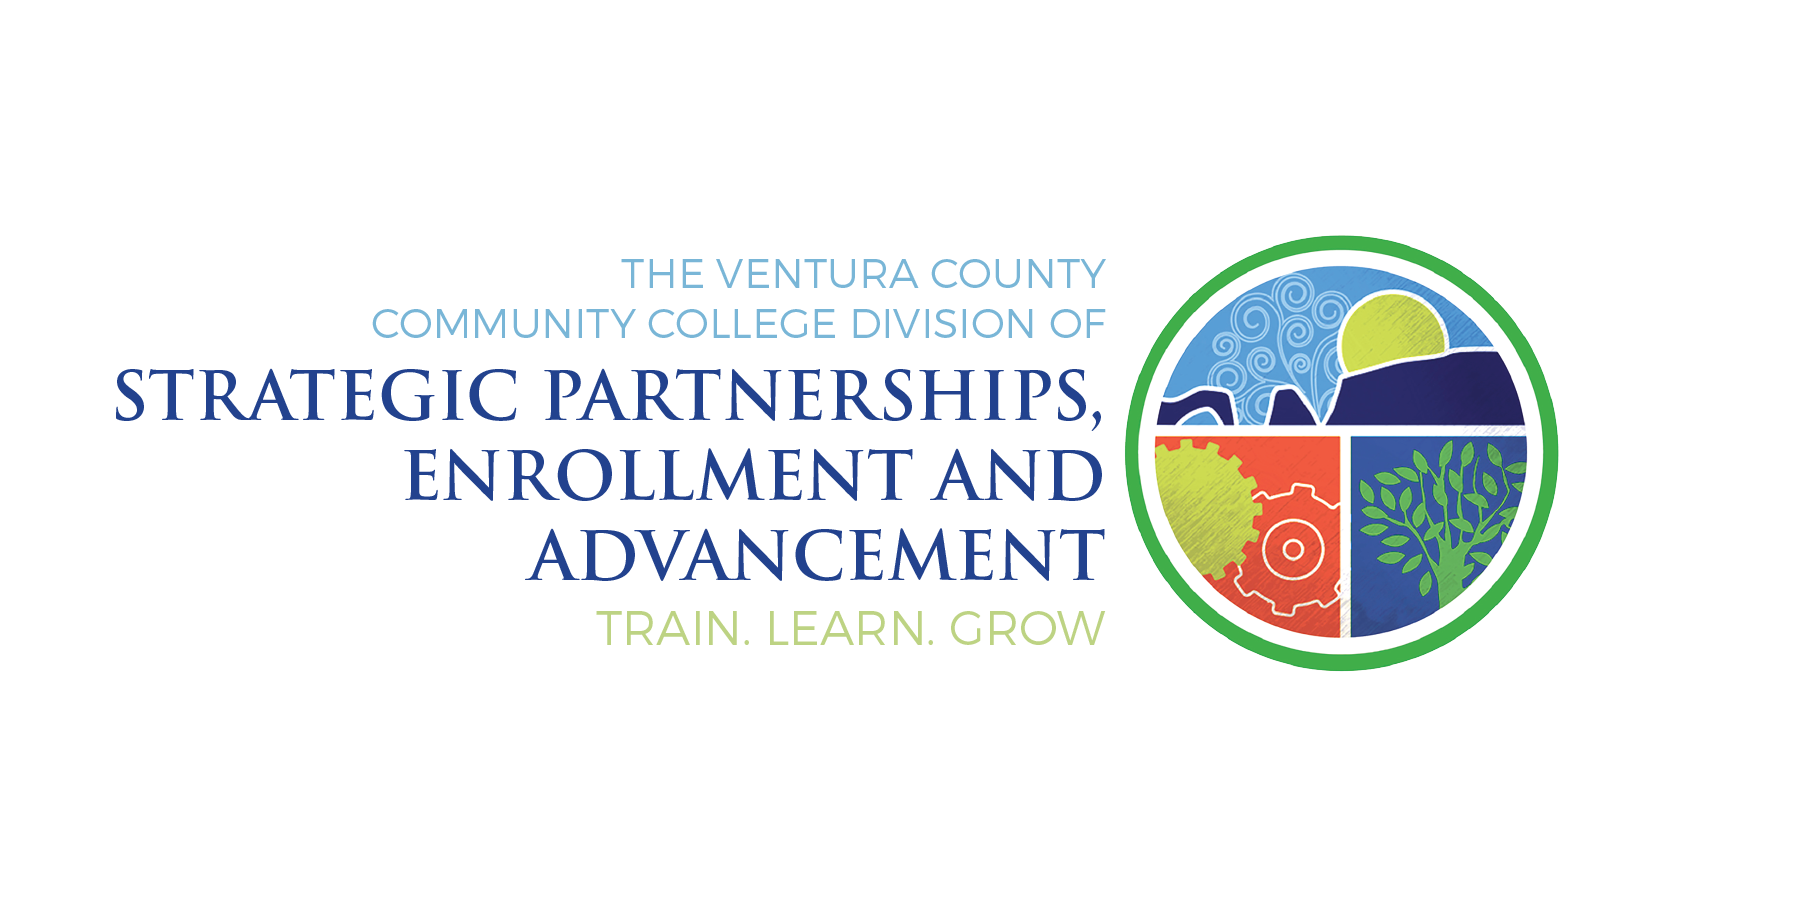 The Ventura County Community College Division of Strategic Partnerships, Enrollment, and Advancement. Share. Learn. Grow.